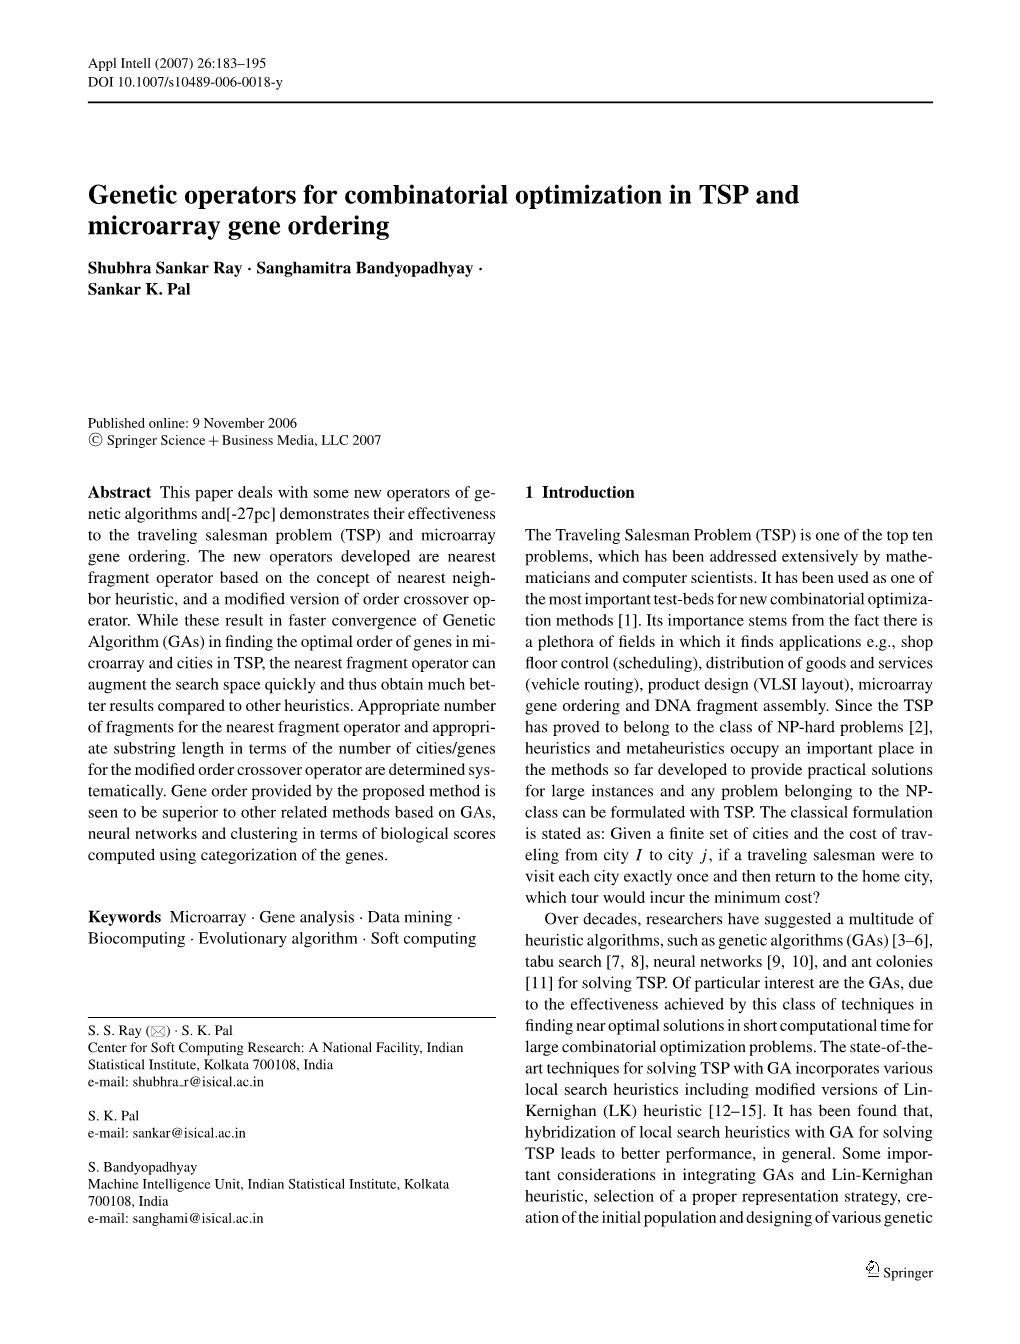 Genetic Operators for Combinatorial Optimization in TSP and Microarray Gene Ordering